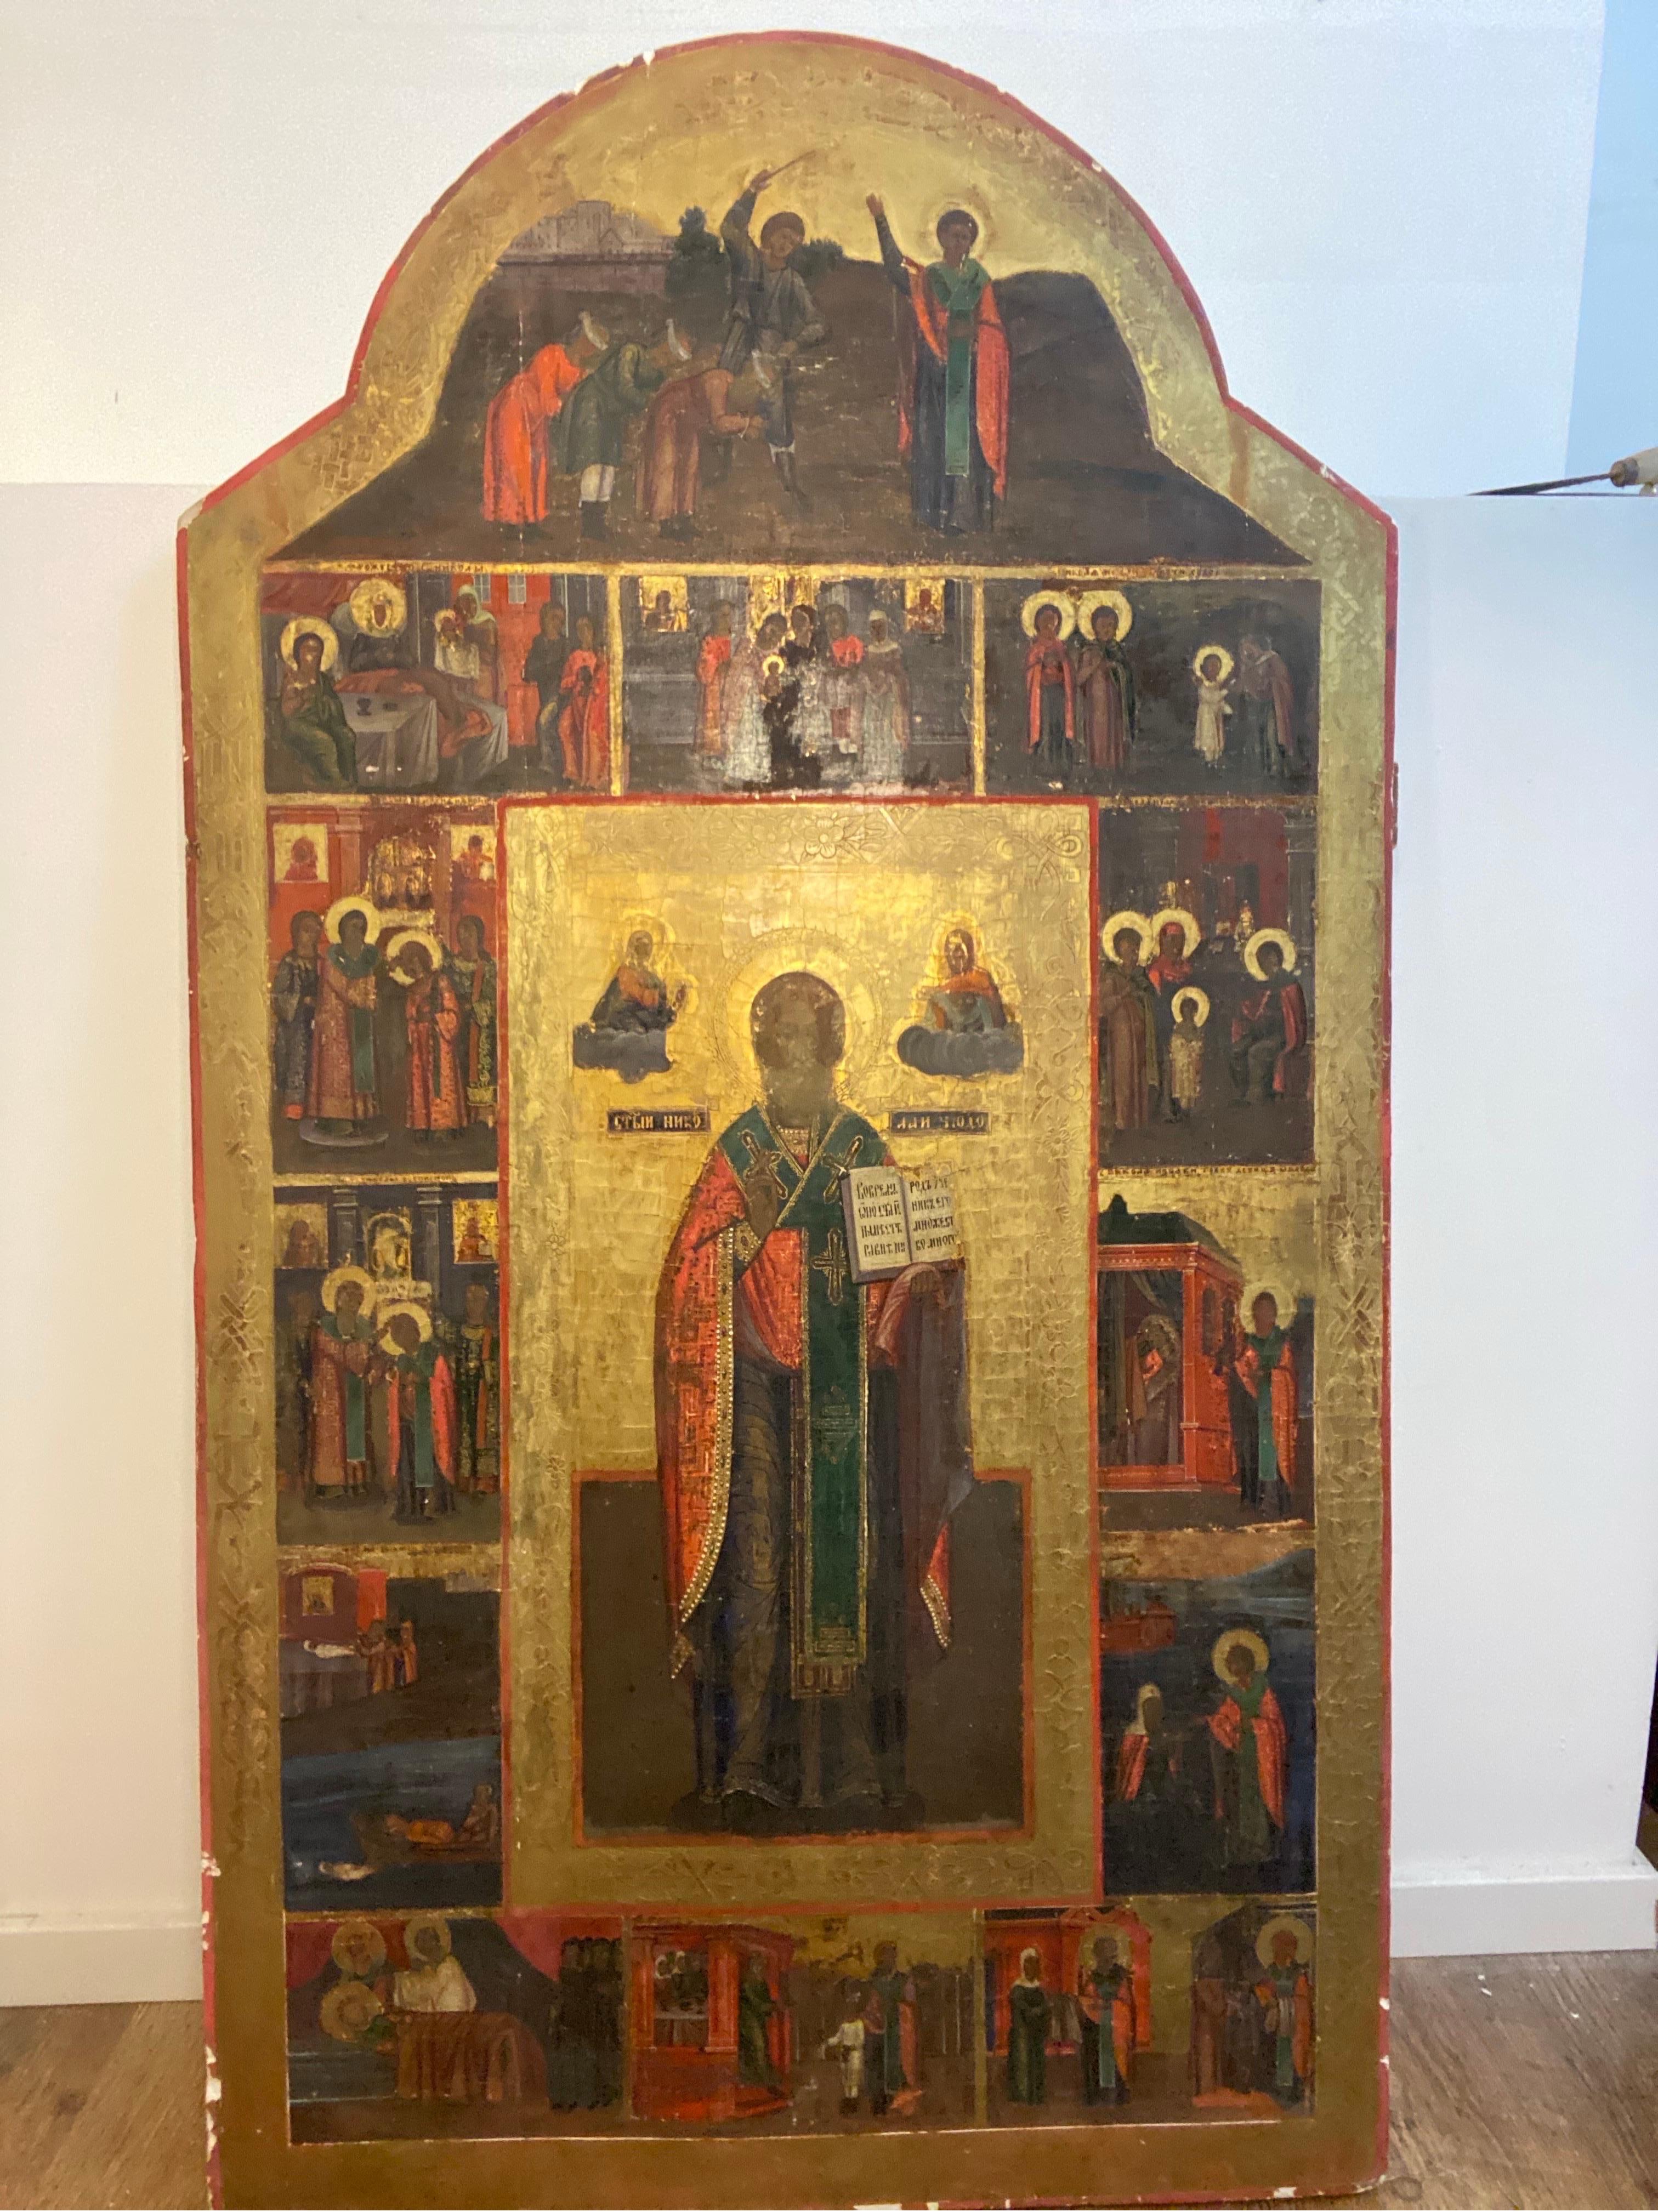 Hand made wood painting of a priest character with cape holding a book and 16 additional characters on the sides.